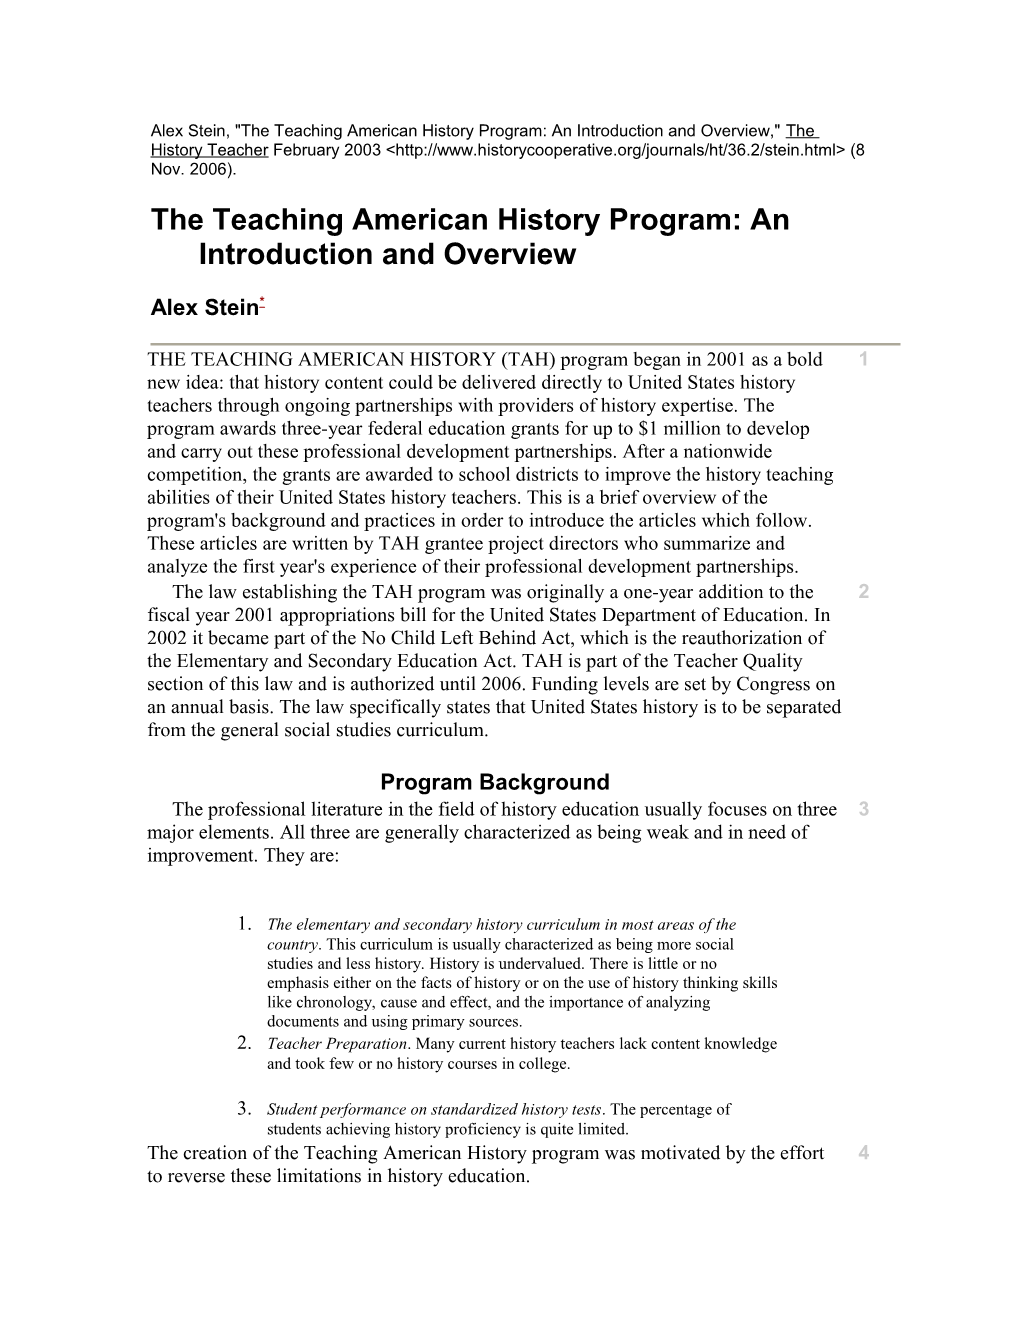 Alex Stein, the Teaching American History Program: an Introduction and Overview, the History